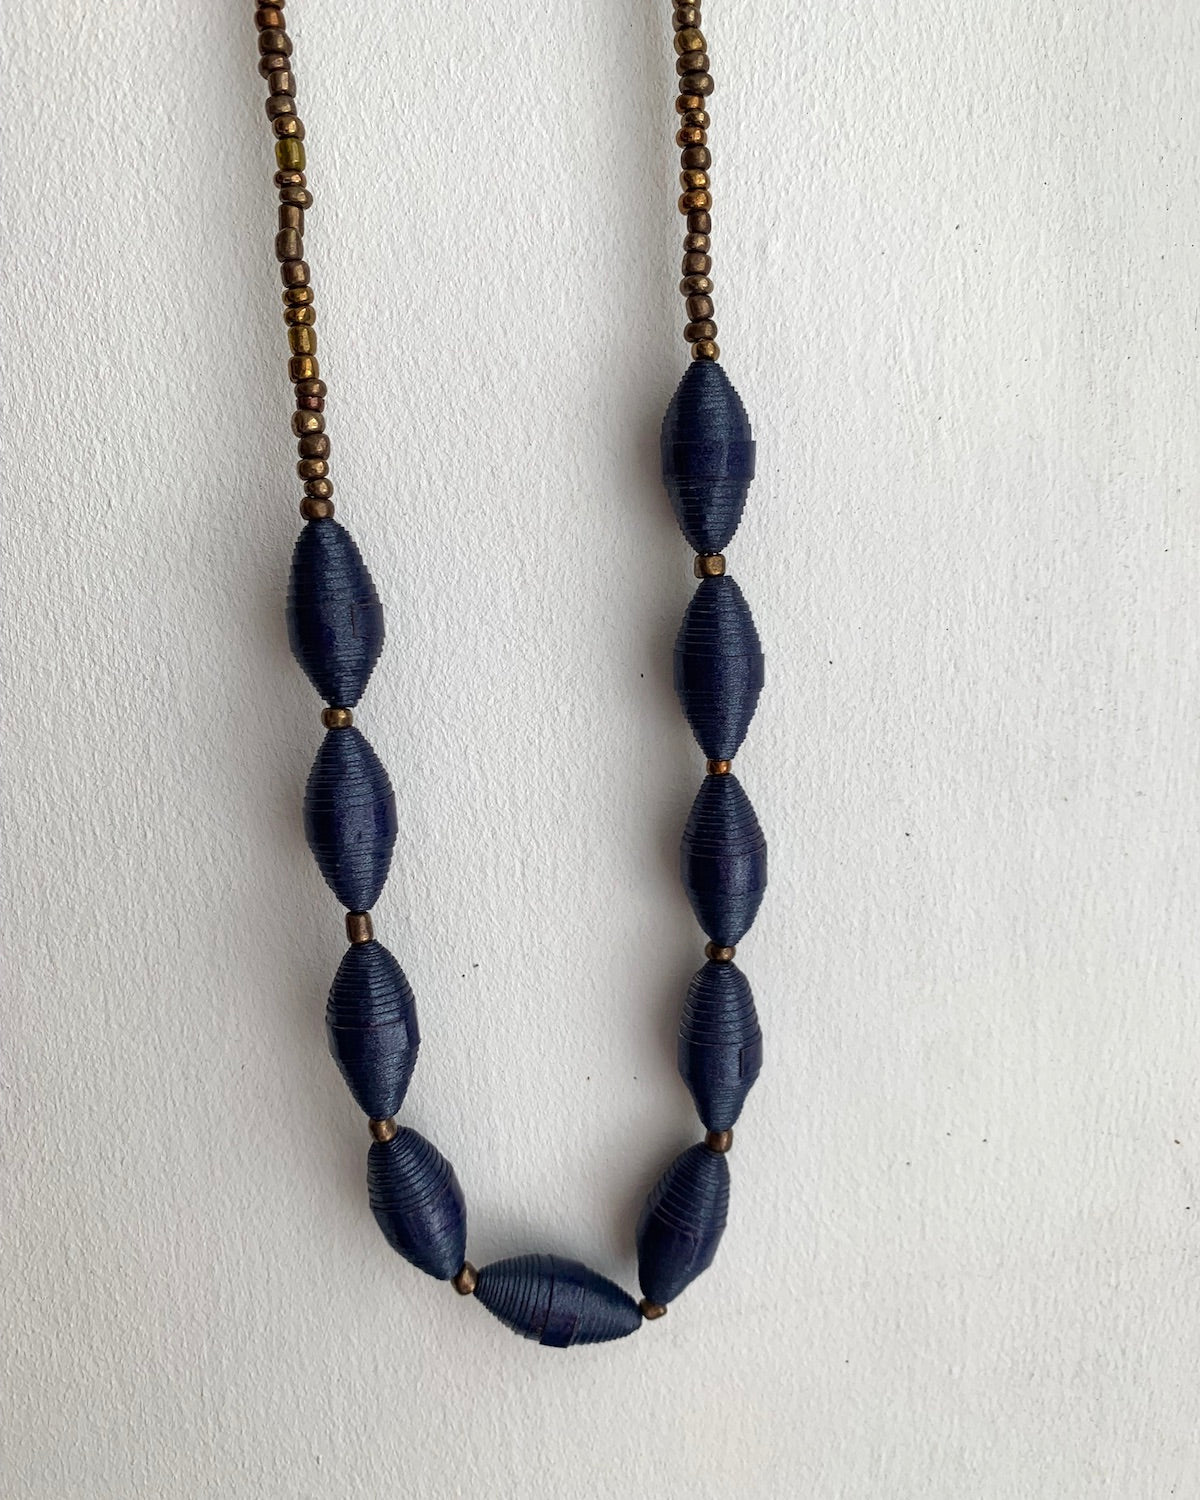 ON SALE - Swiss Blue Topaz Faceted Rondelle Beads Necklace